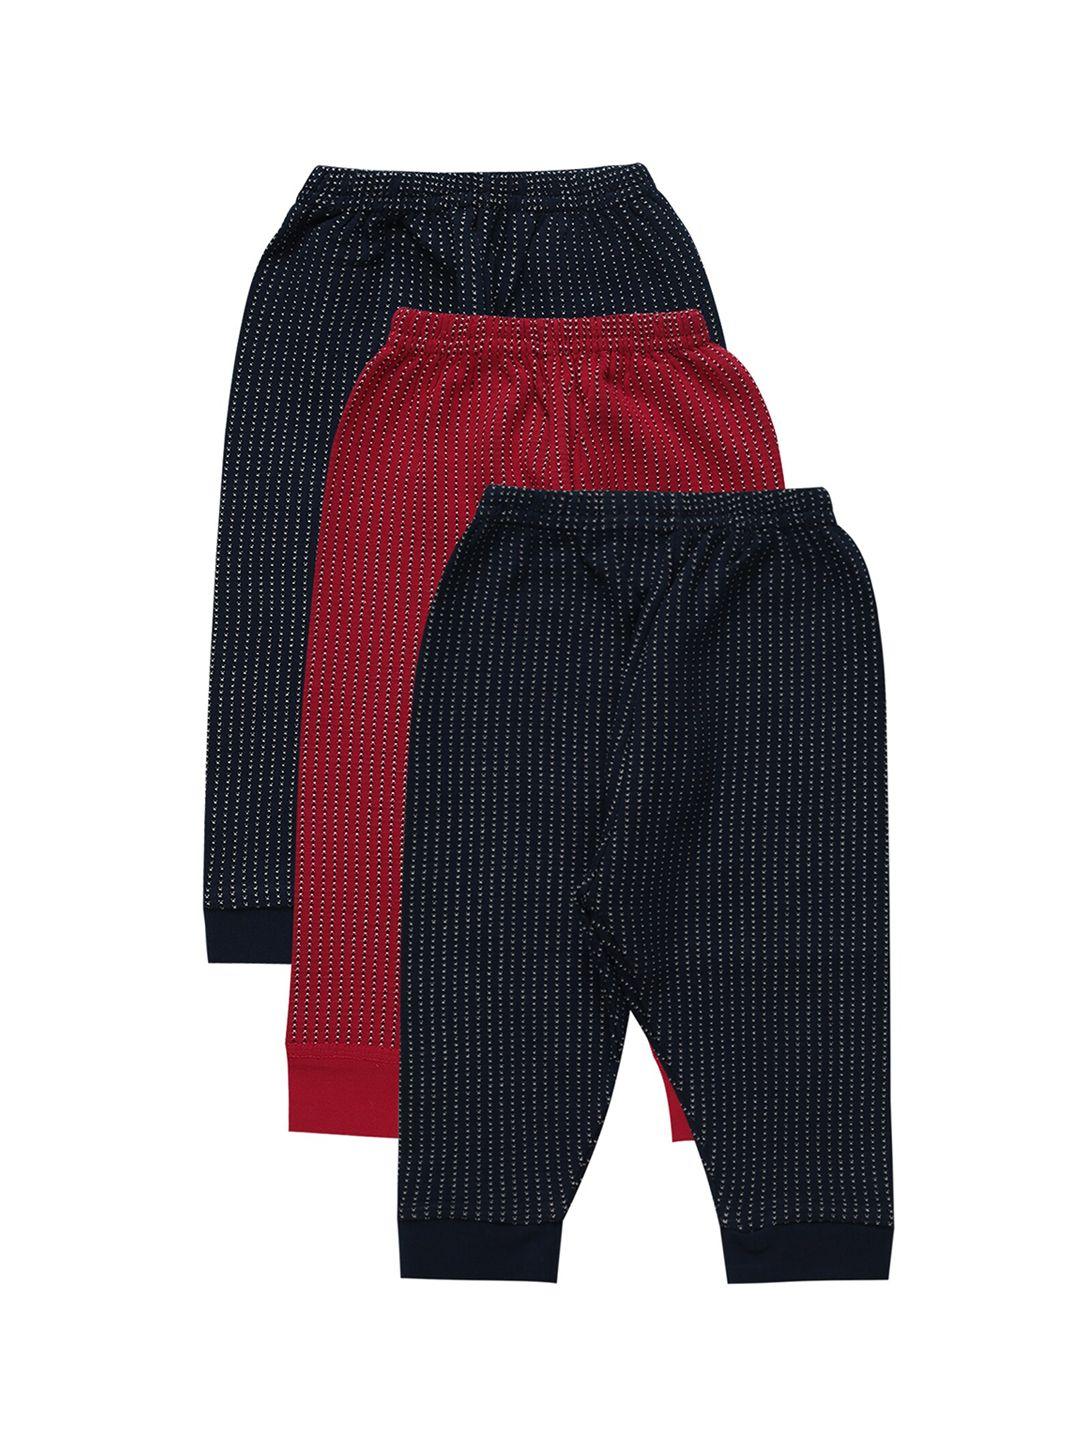 bodycare kids pack of 3 navy blue & red printed lounge pants